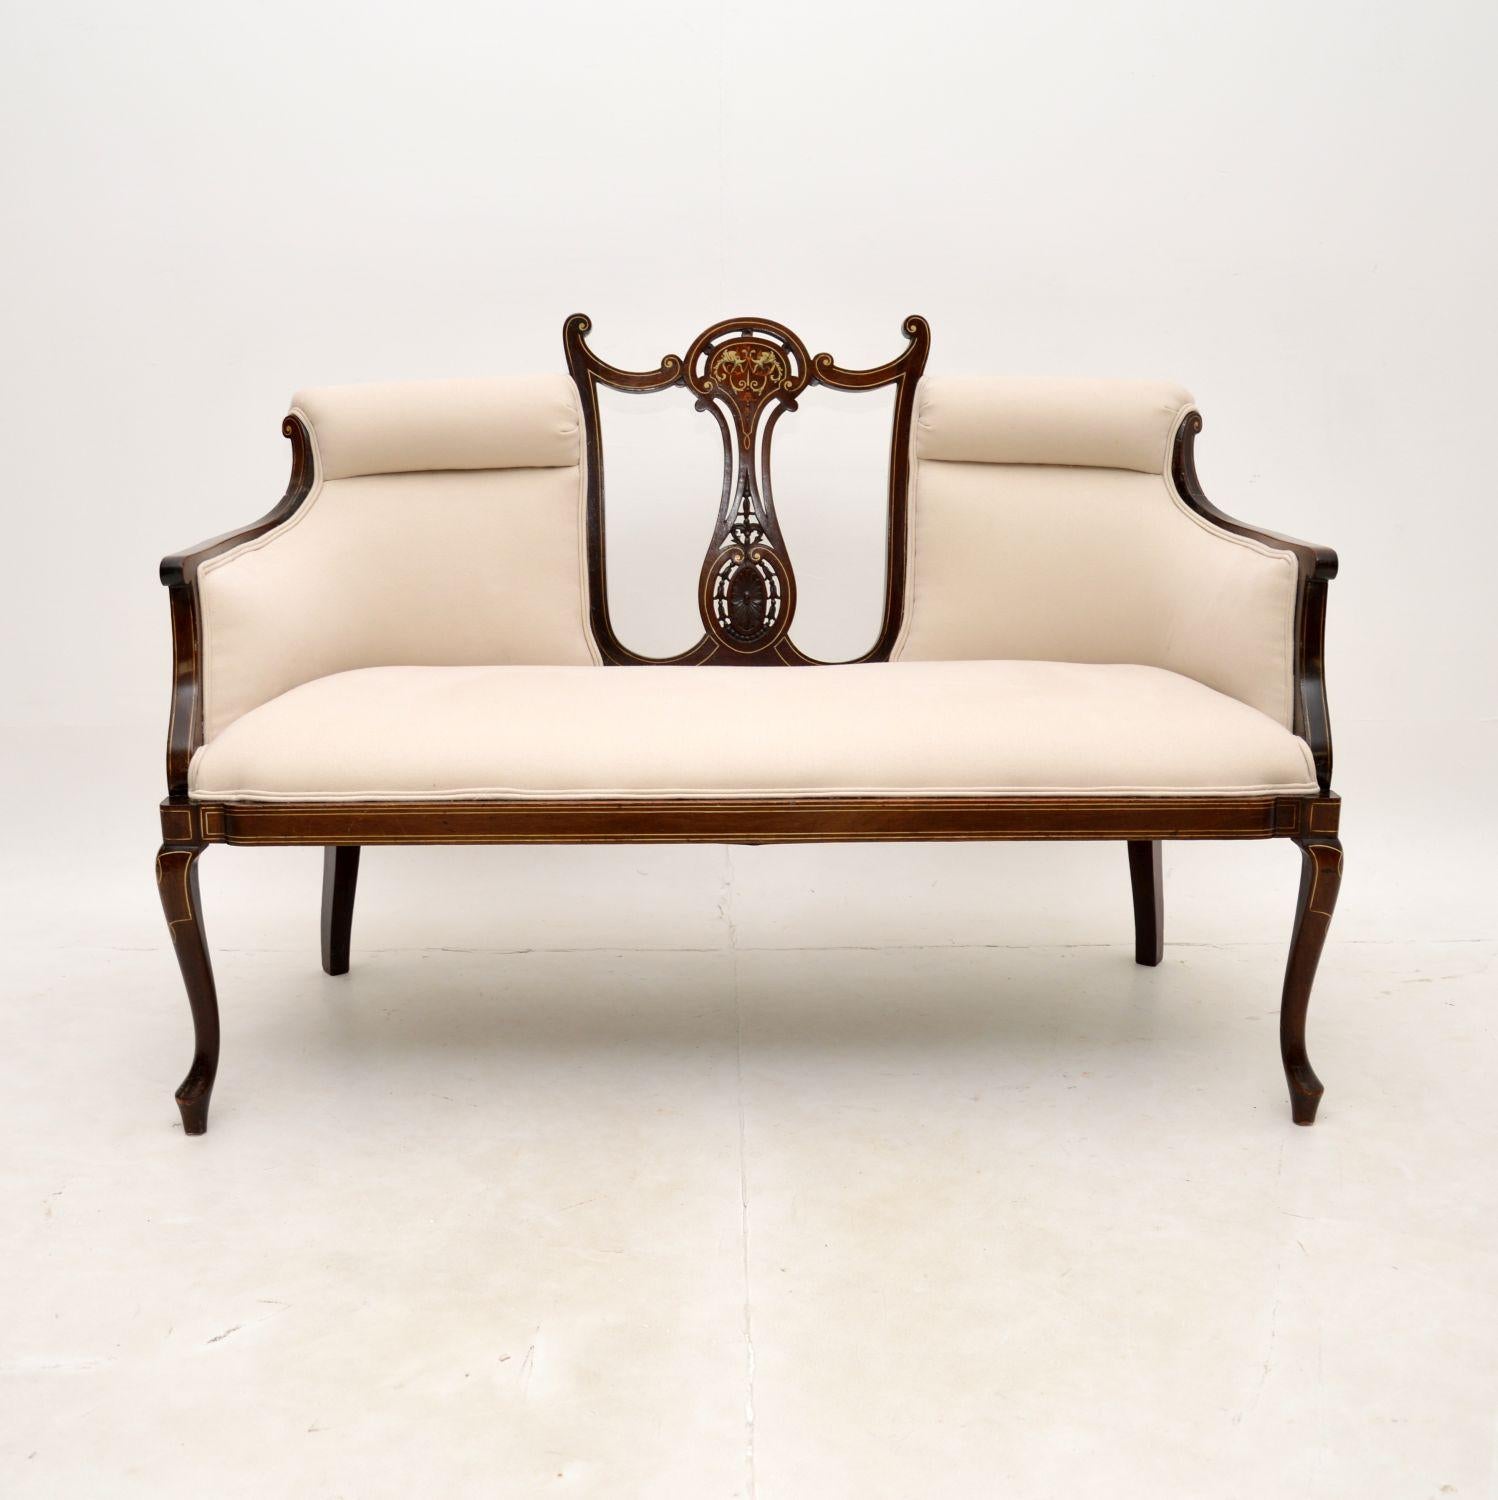 A fantastic antique Edwardian settee. This was made in England, it dates from the 1890-1900 period.

The quality is outstanding, this is beautifully designed and is a very useful size. The frame has elegant curves, it is really well made, sturdy and